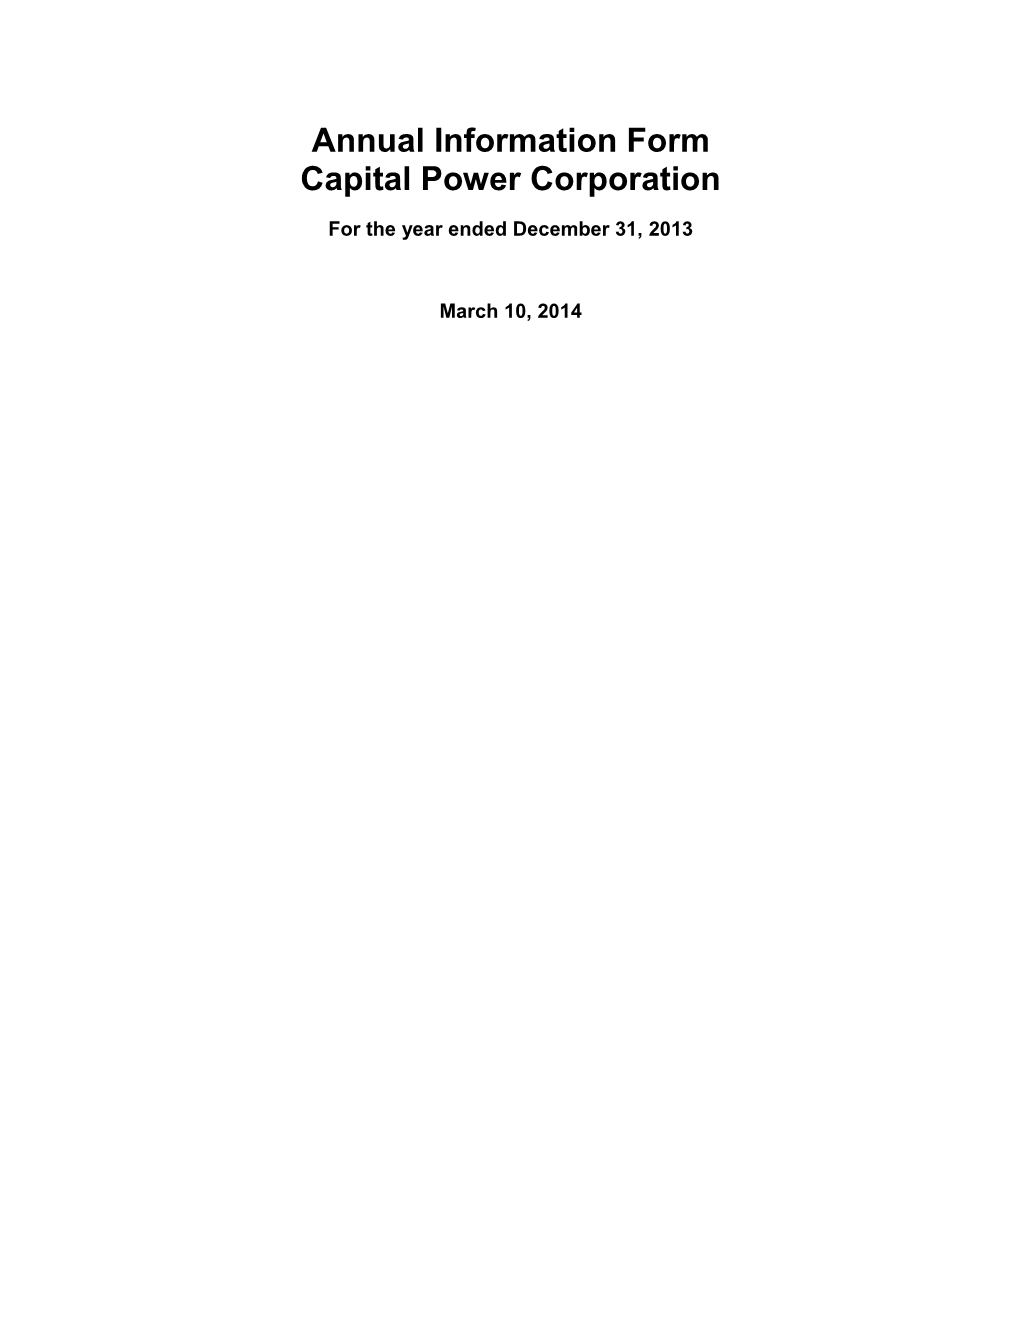 Annual Information Form Capital Power Corporation